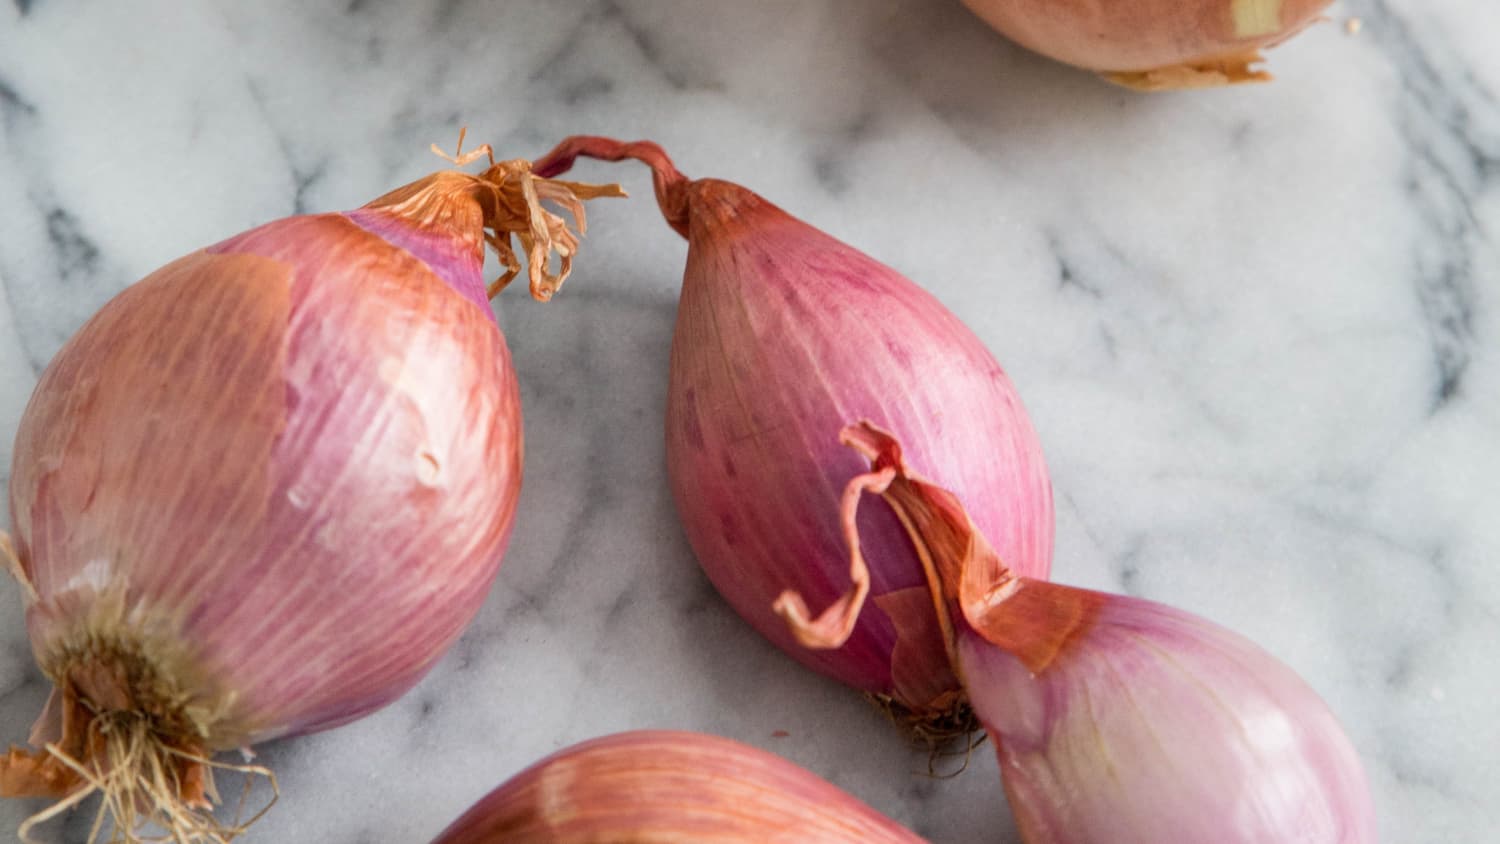 What Are Shallots?